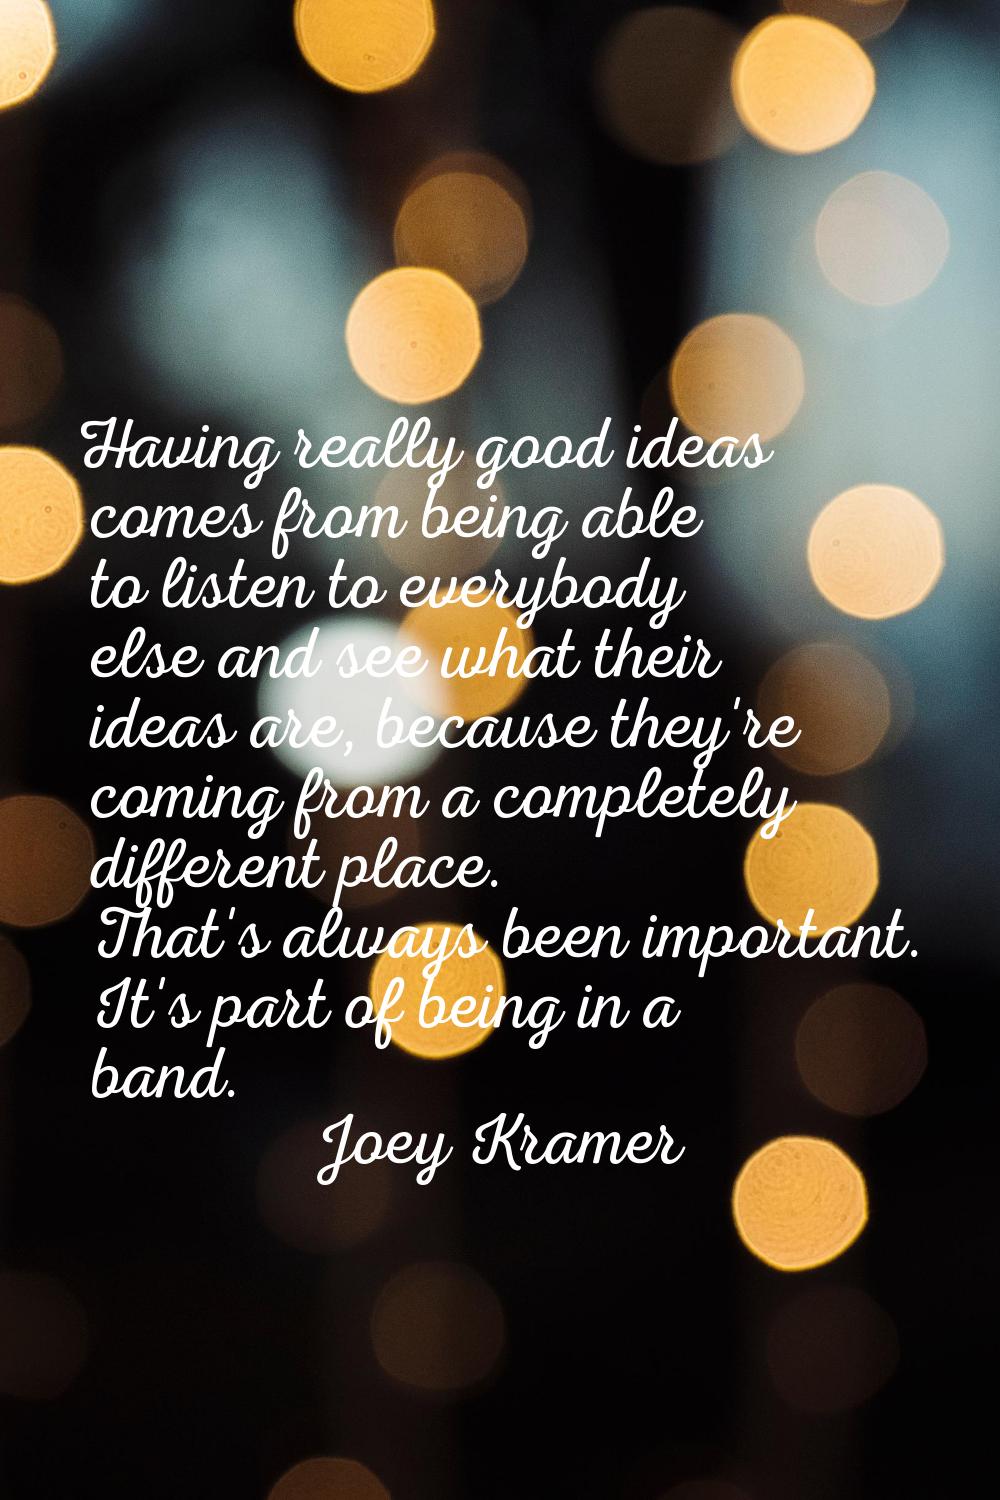 Having really good ideas comes from being able to listen to everybody else and see what their ideas